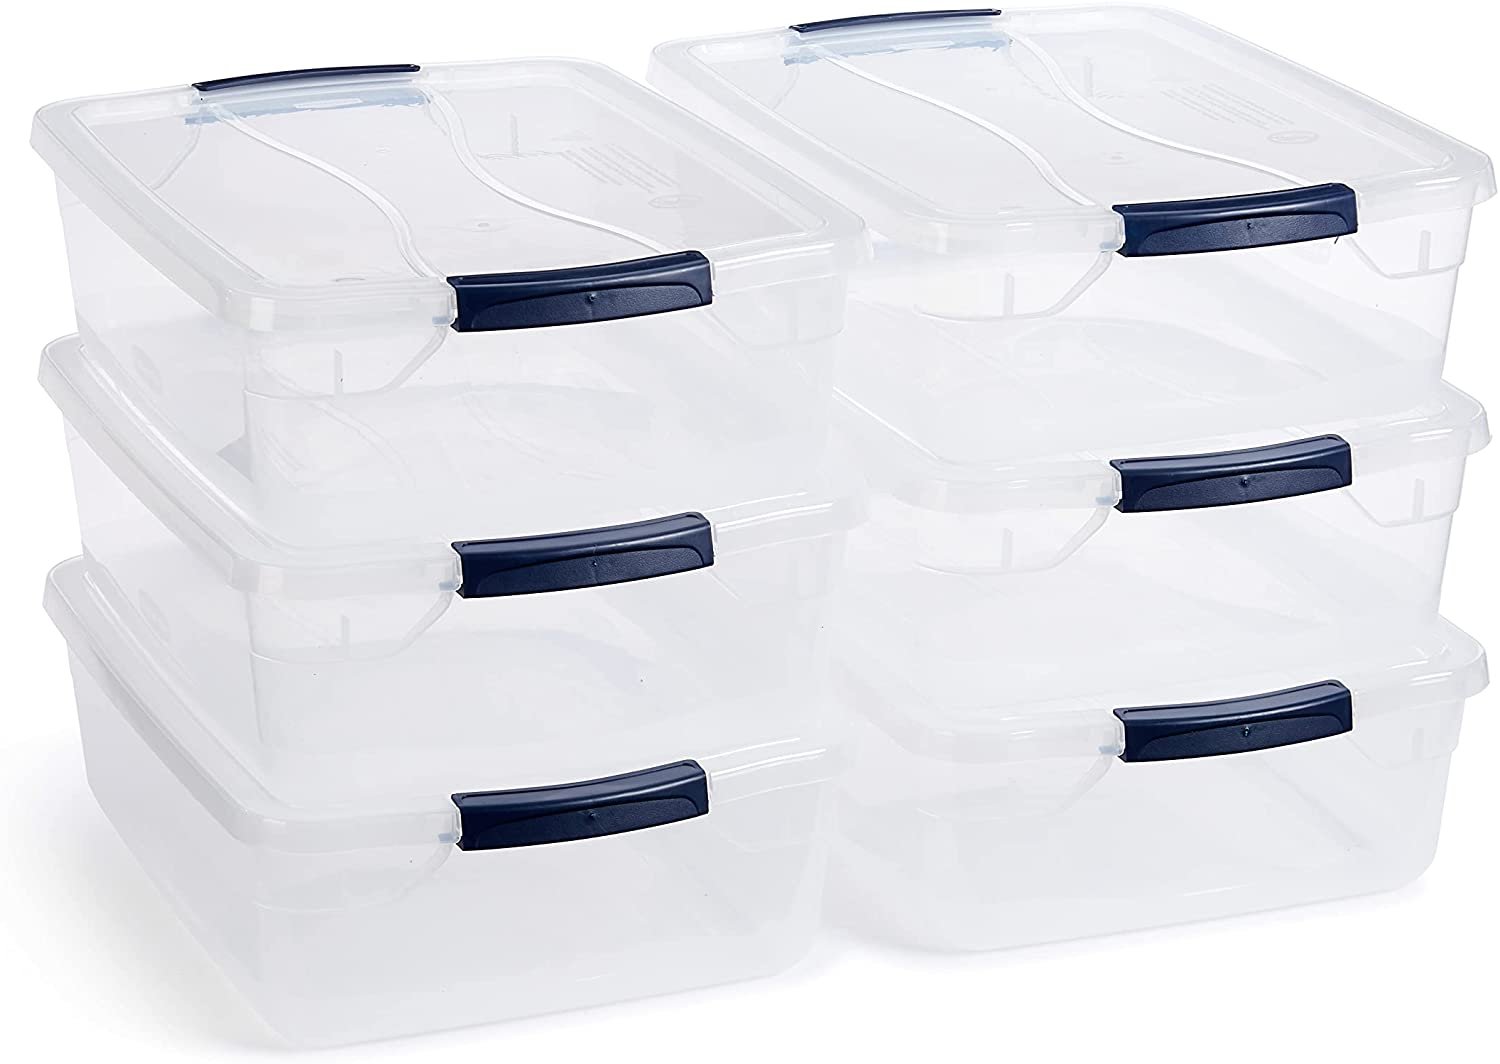 Rubbermaid Cleverstore 16 Quart Plastic Storage Tote Container with Lid (6 Pack) - image 1 of 9